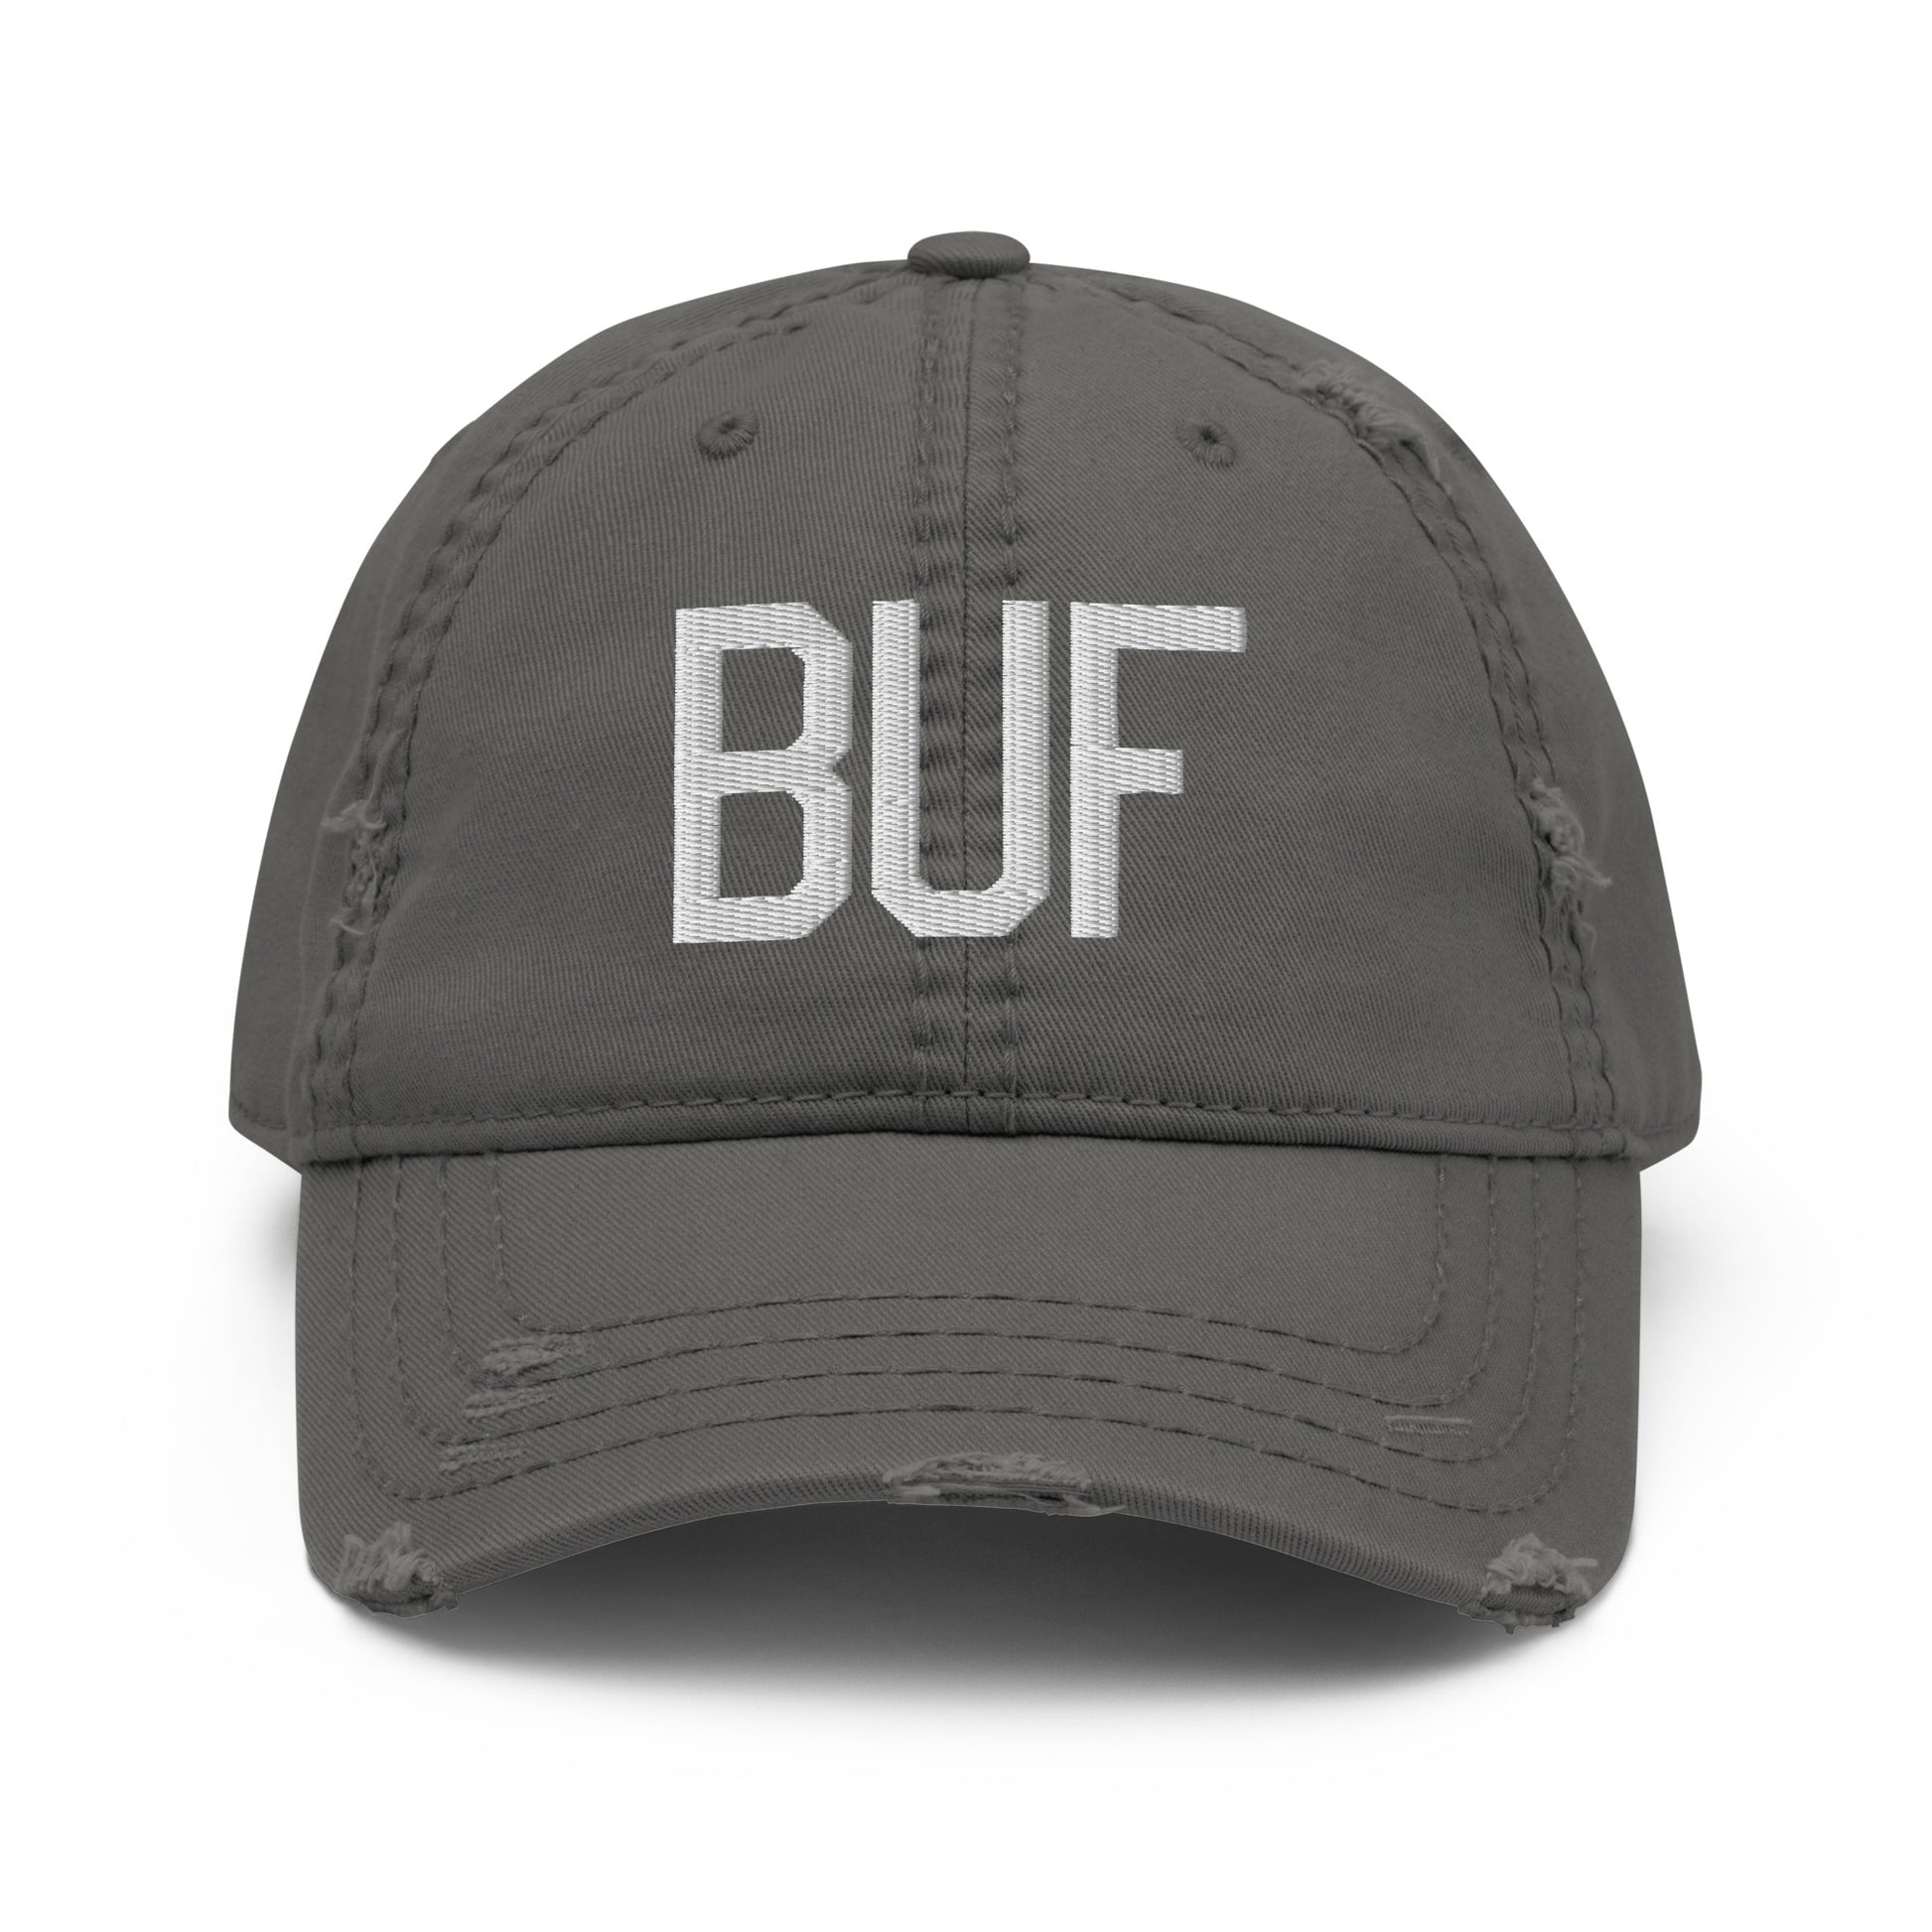 Airport Code Distressed Hat - White • BUF Buffalo • YHM Designs - Image 15